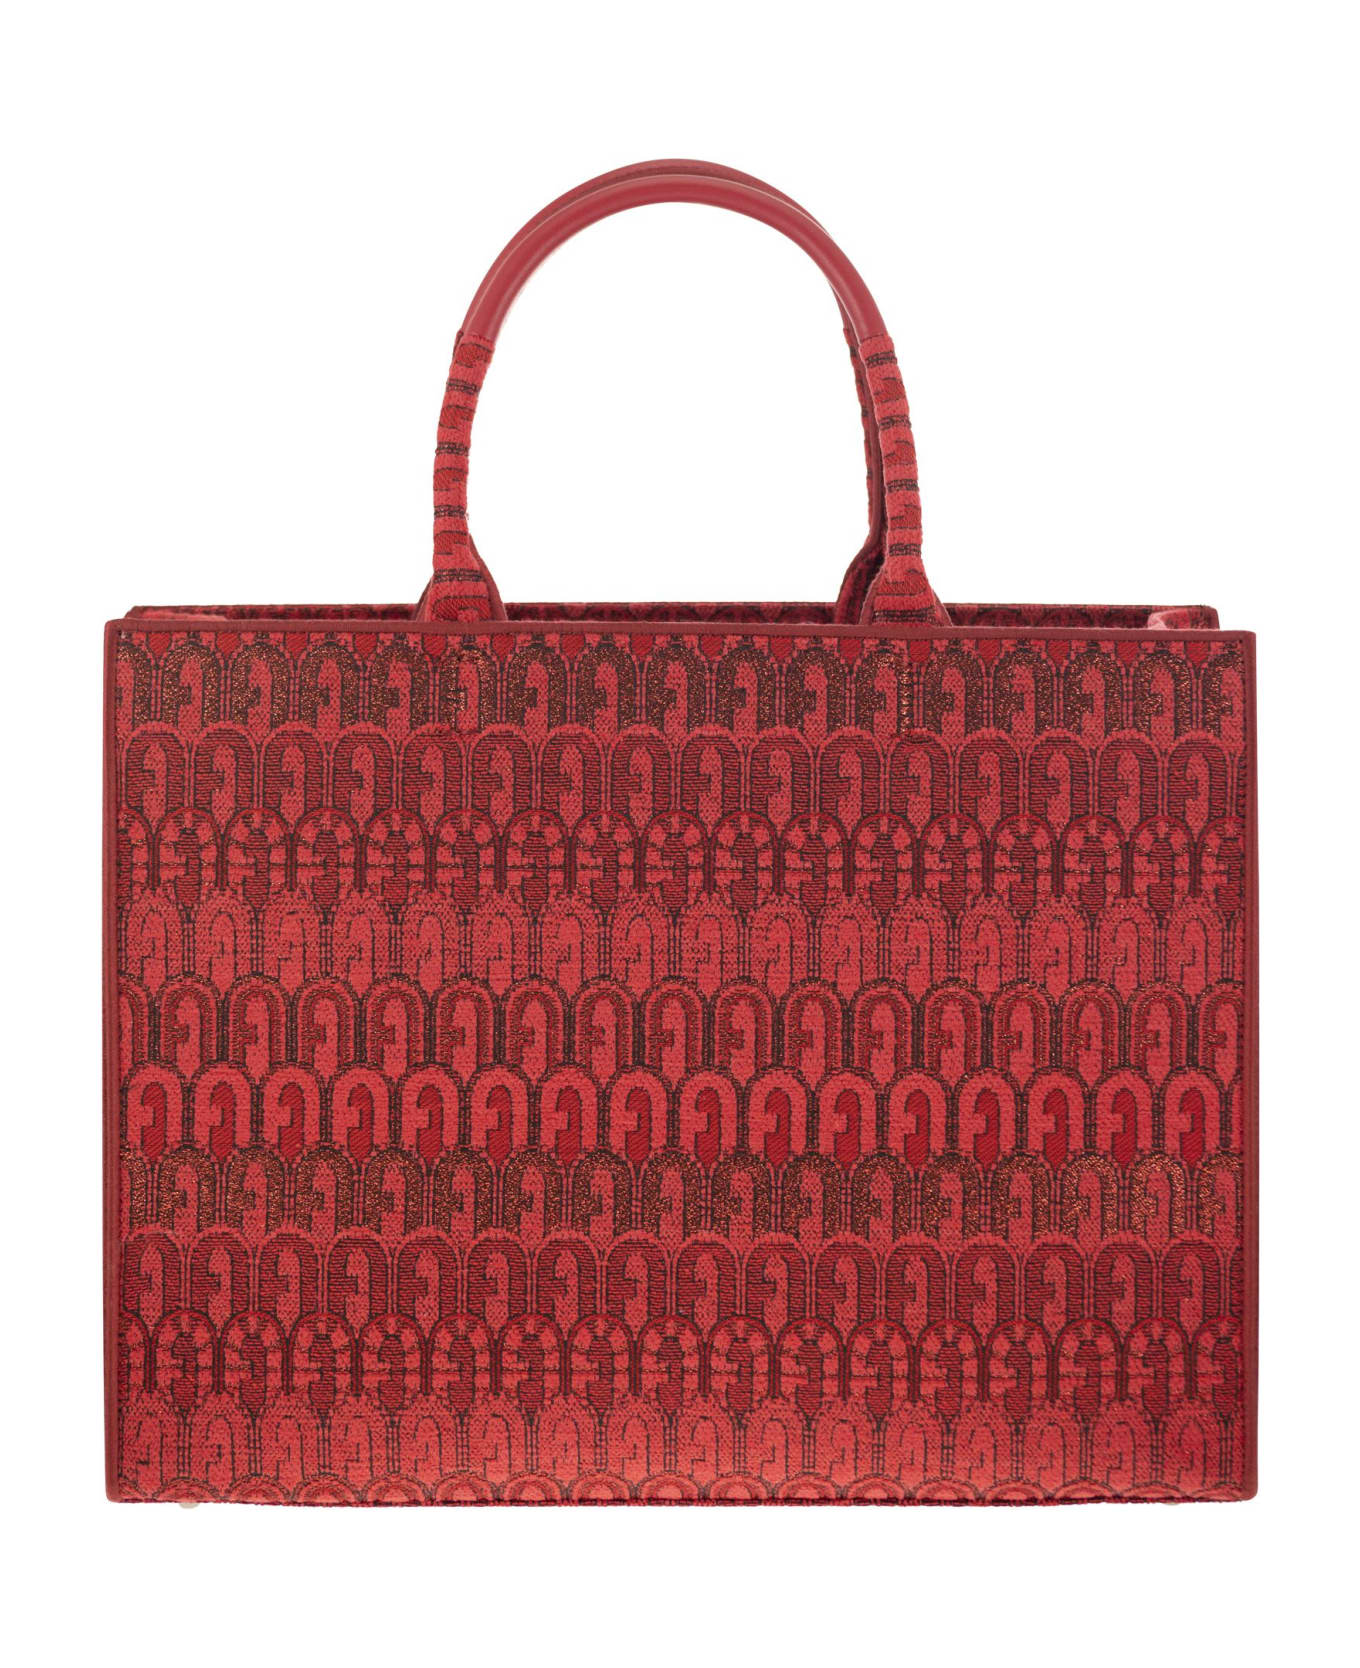 Furla Opportunity - Tote Bag - Red